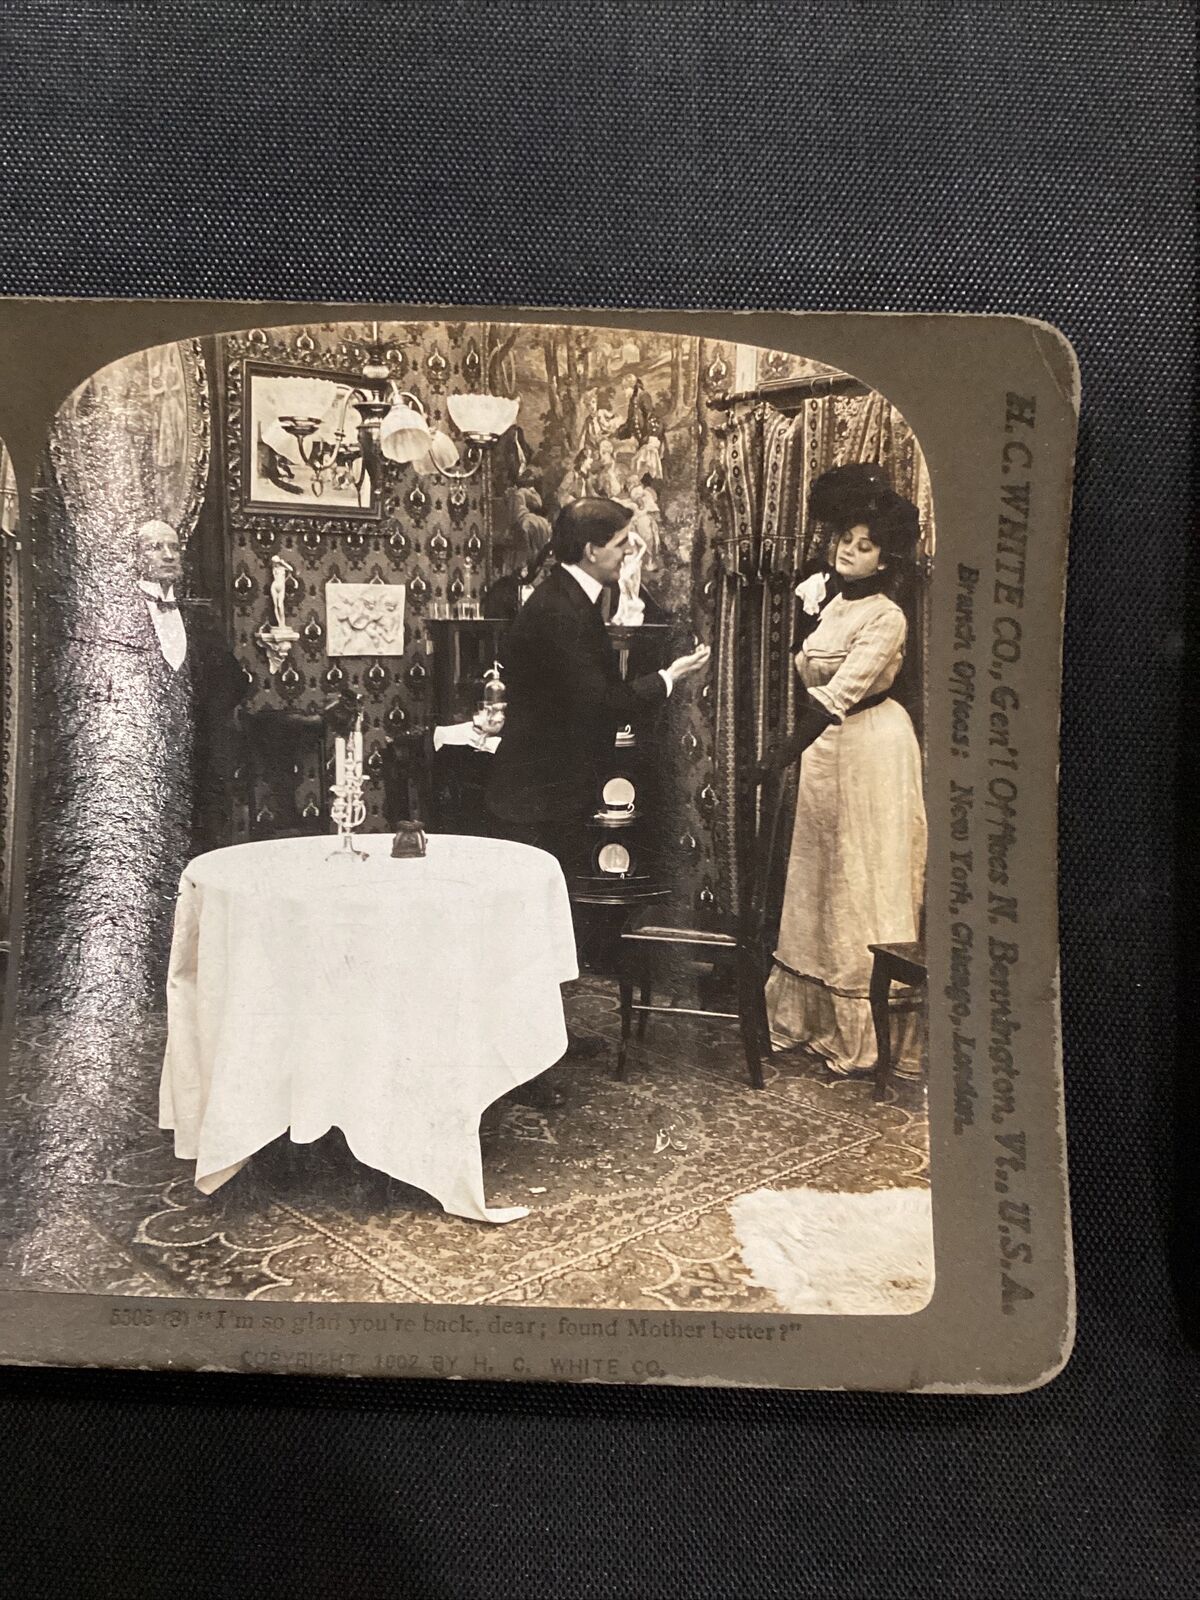 1902 Glad You’re Back Dear Stereoview Photo Card